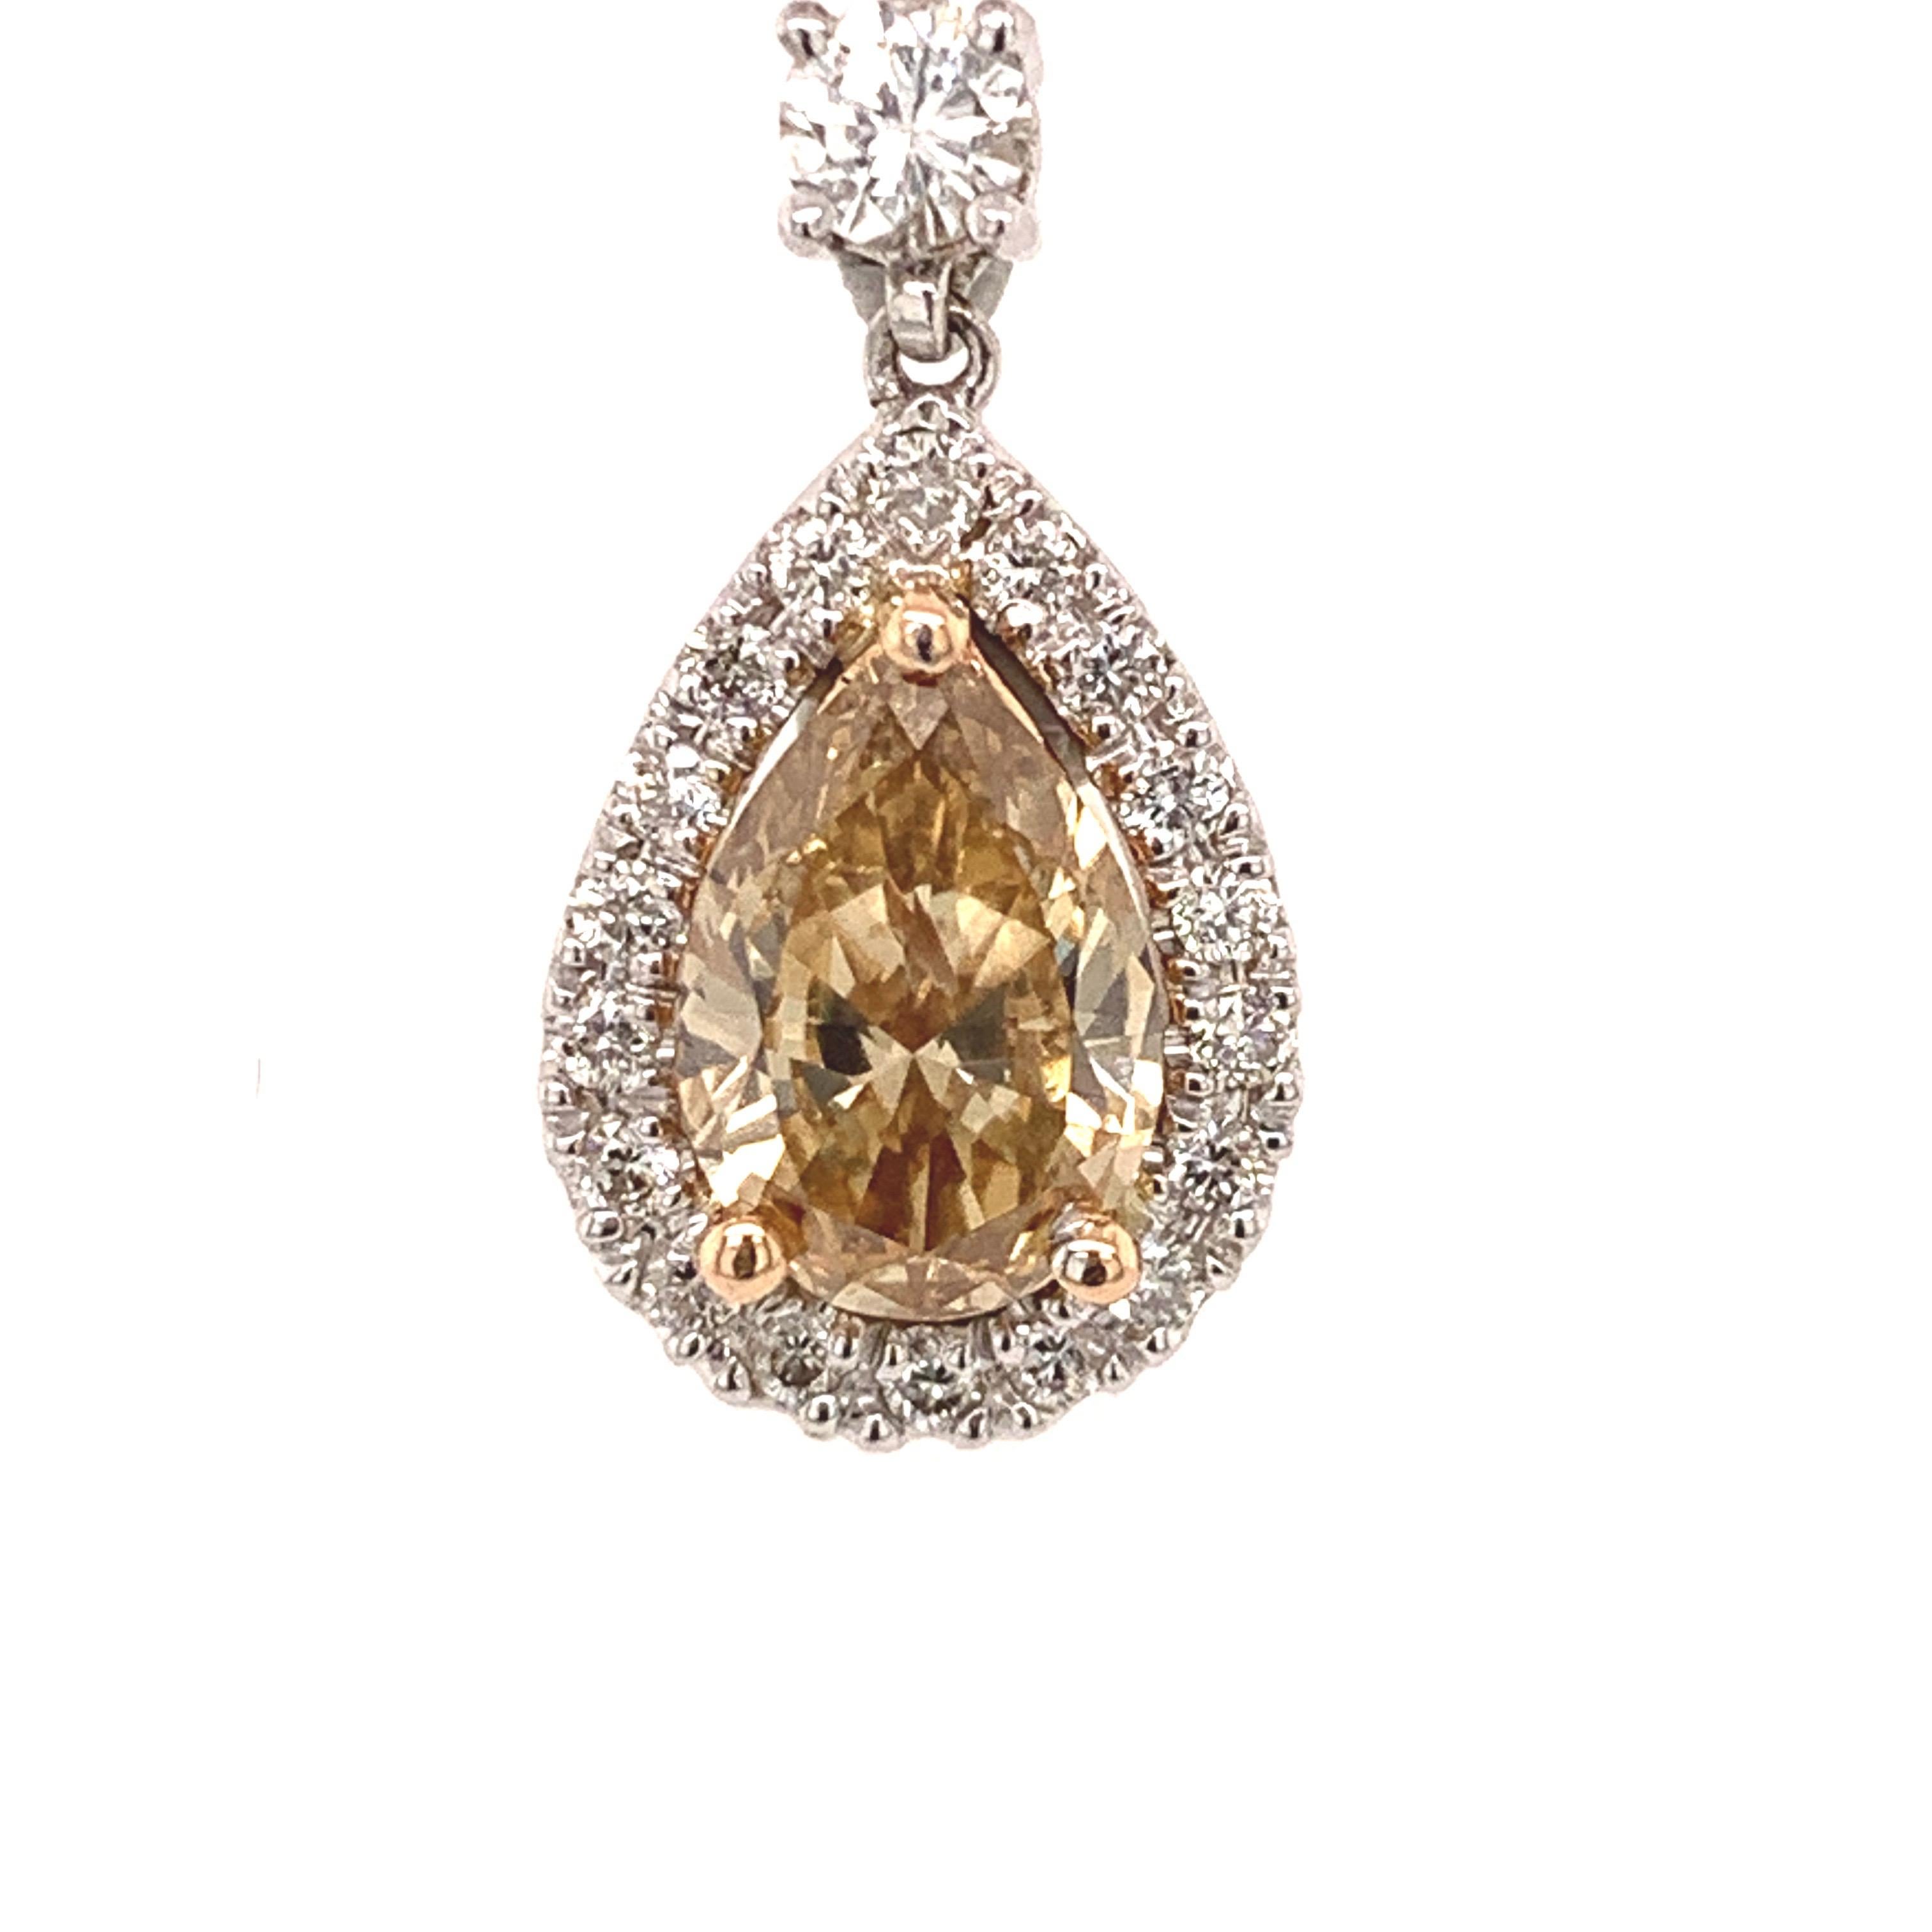 Elegant fancy brown-yellow diamond pendant. High brilliance, pear faceted, GIA certified, 1.11 carats, natural fancy brown-yellow diamond encased in three bead prongs, accented with a round brilliant cut diamond on the bail and framing the pear